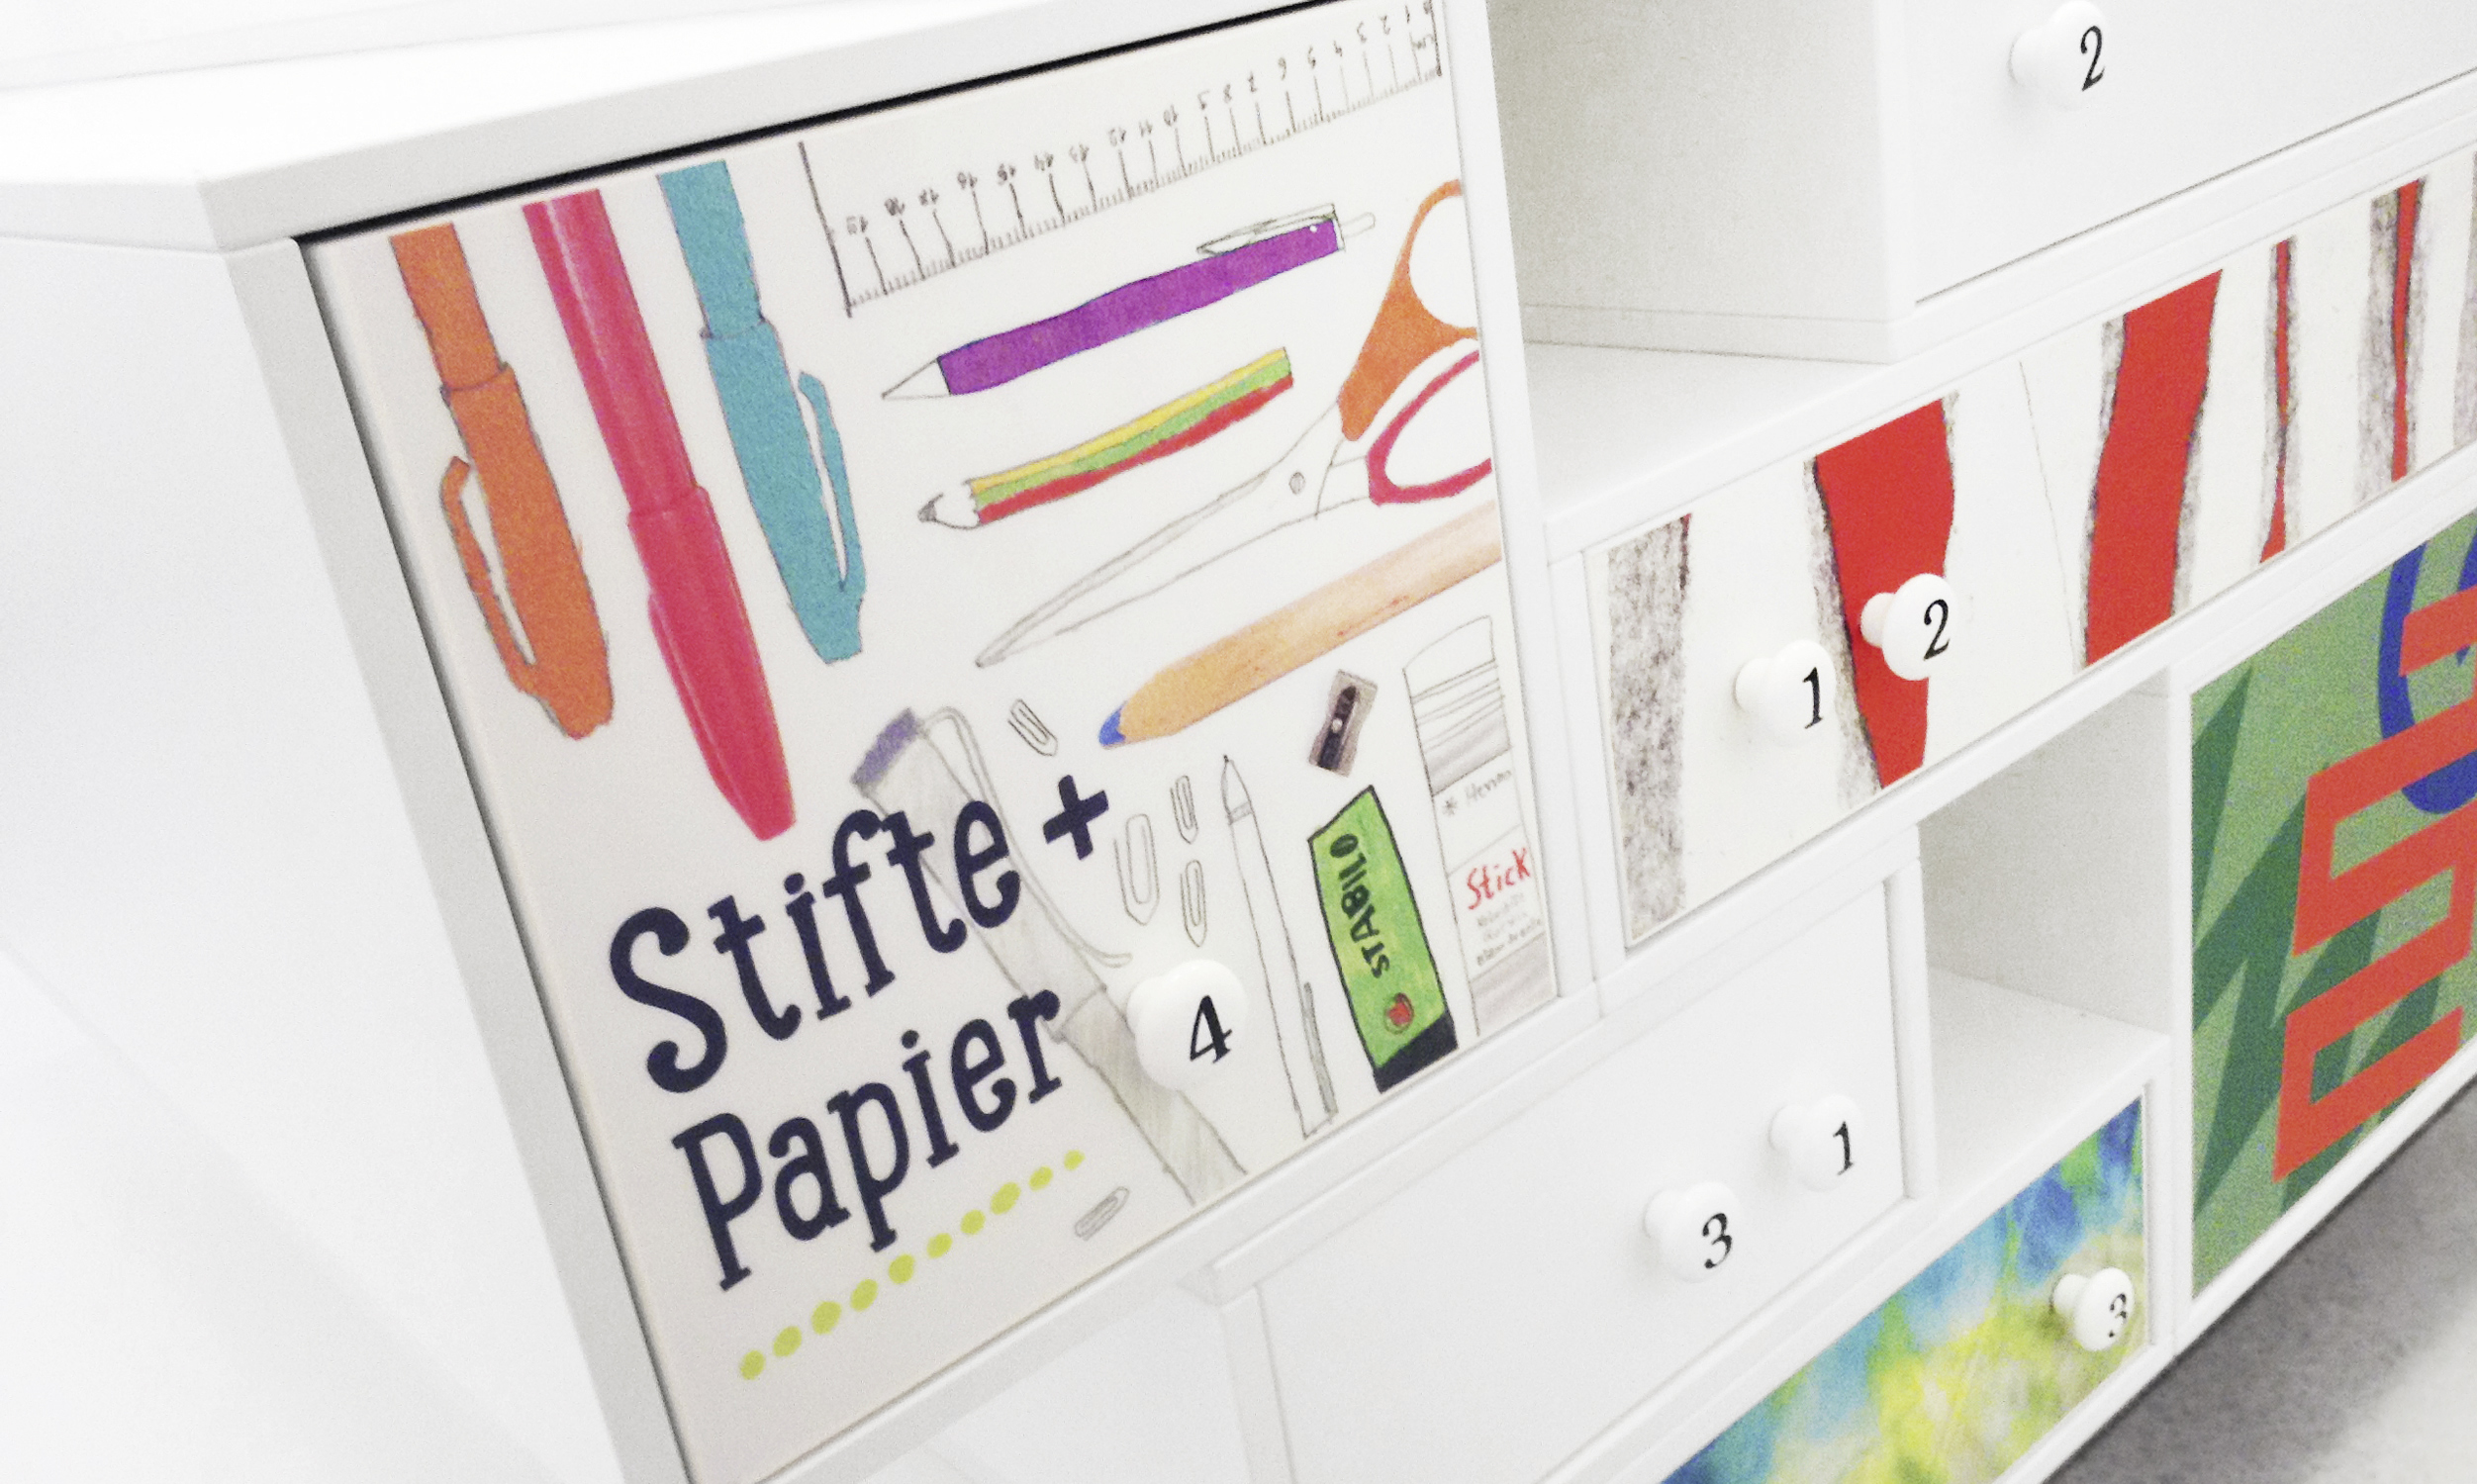 Close-up of the experience room. The picture shows a drawer designed with illustrations of pens, scissors, glue sticks and other